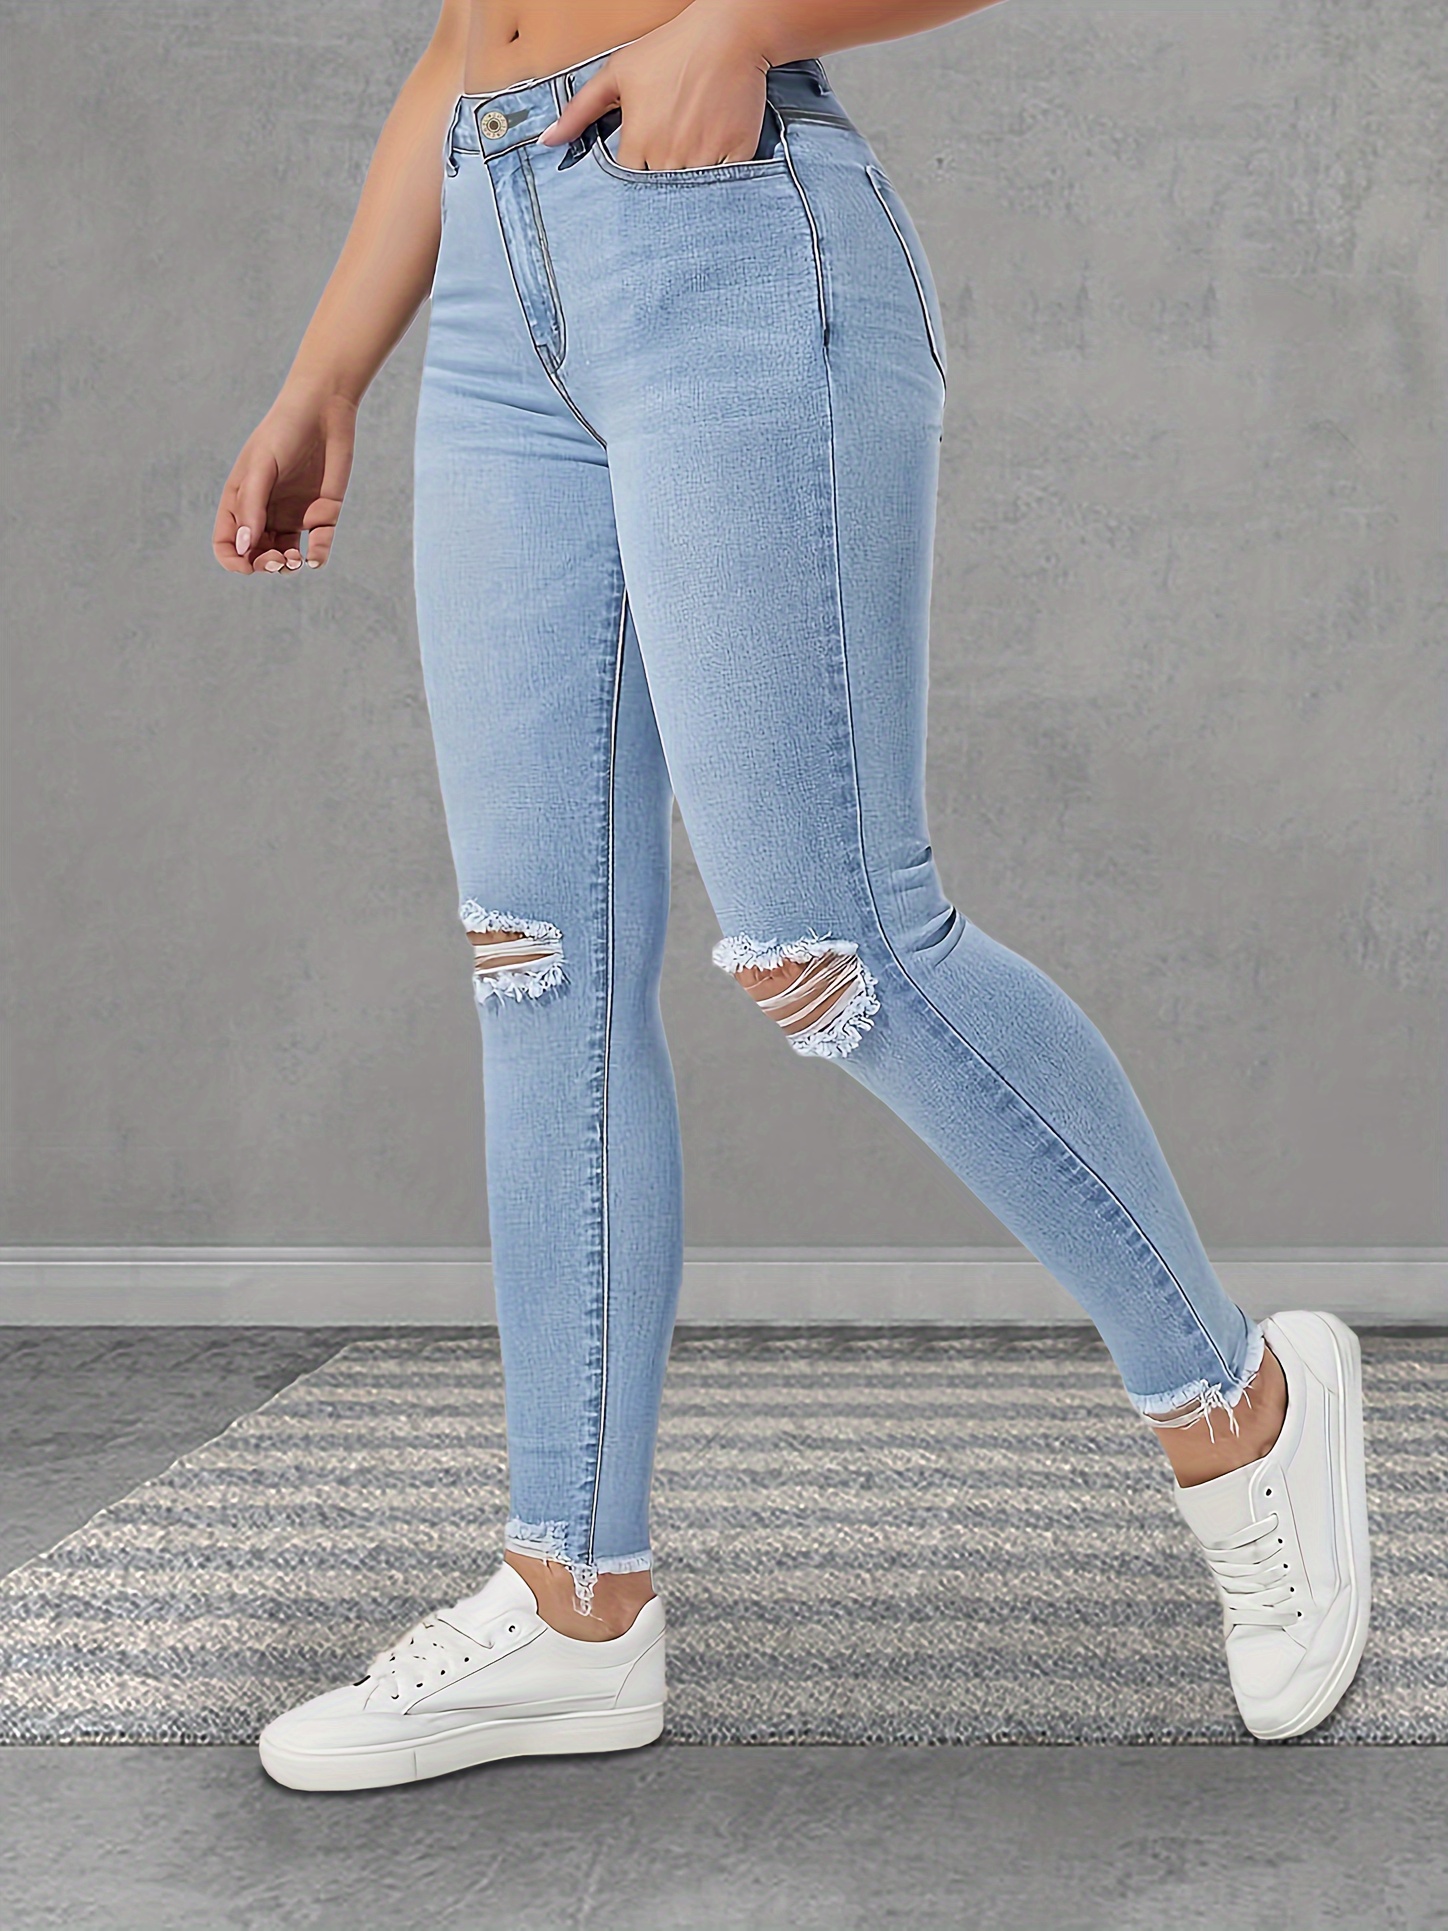 High Waisted Light Wash Ripped Skinny Jeans